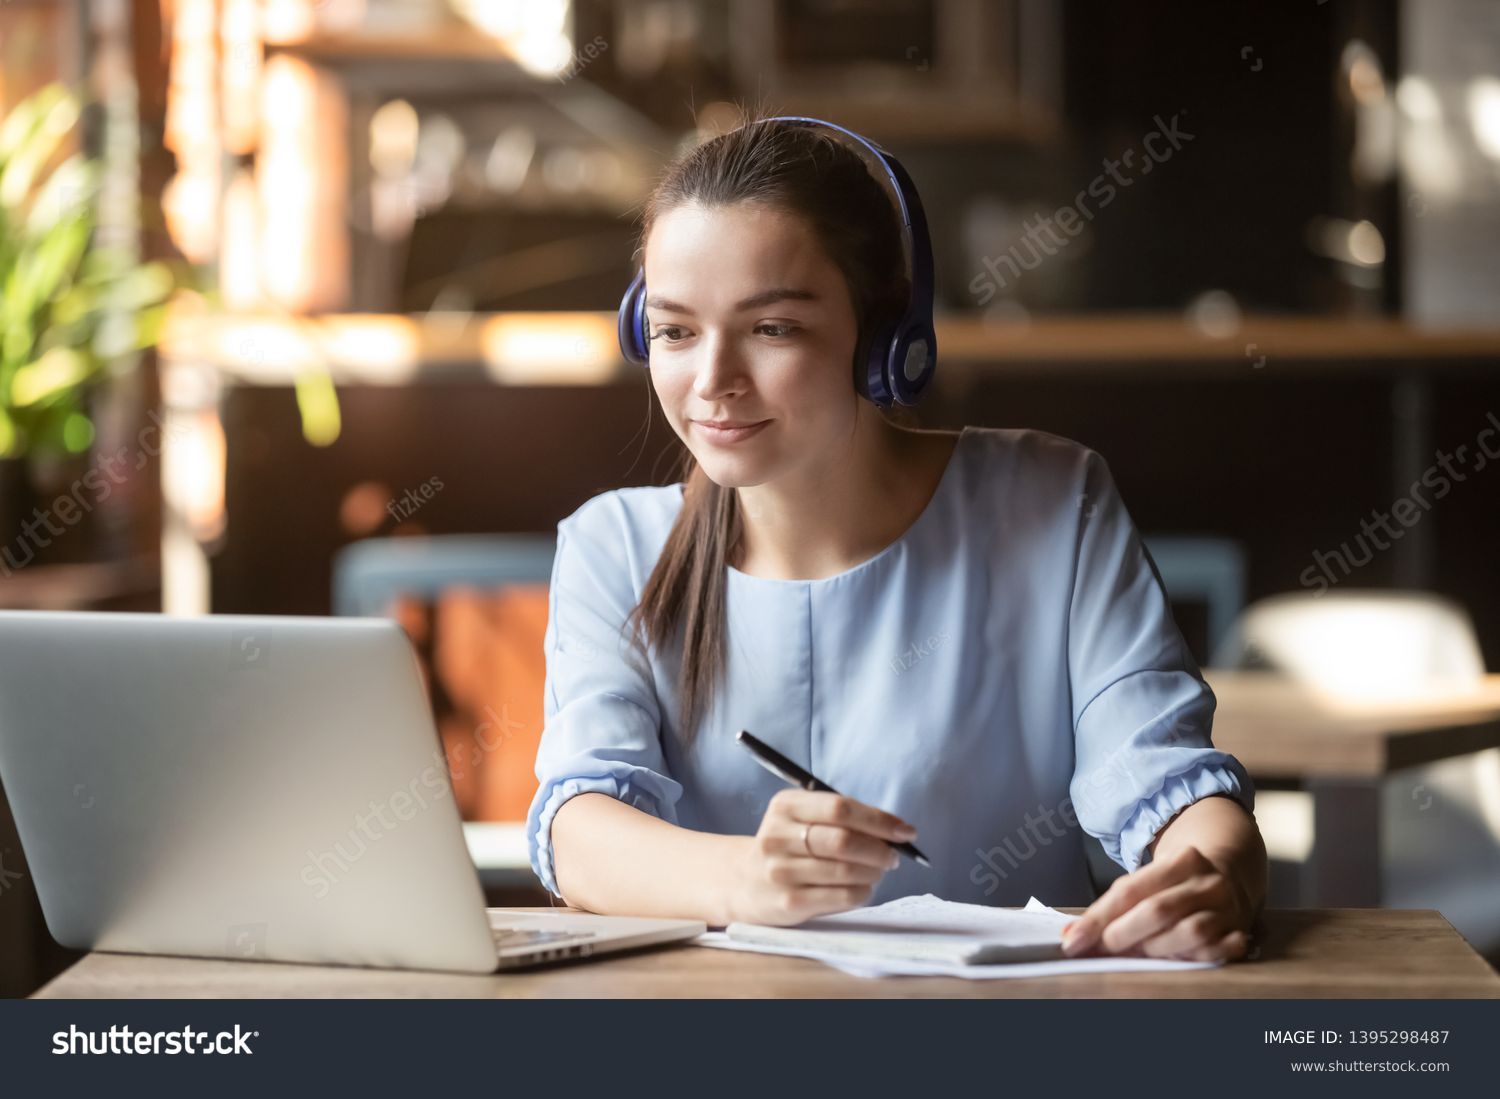 Focused woman wearing headphones using laptop in cafe, writing notes, attractive female student learning language, watching online webinar, listening audio course, e-learning education concept #1395298487